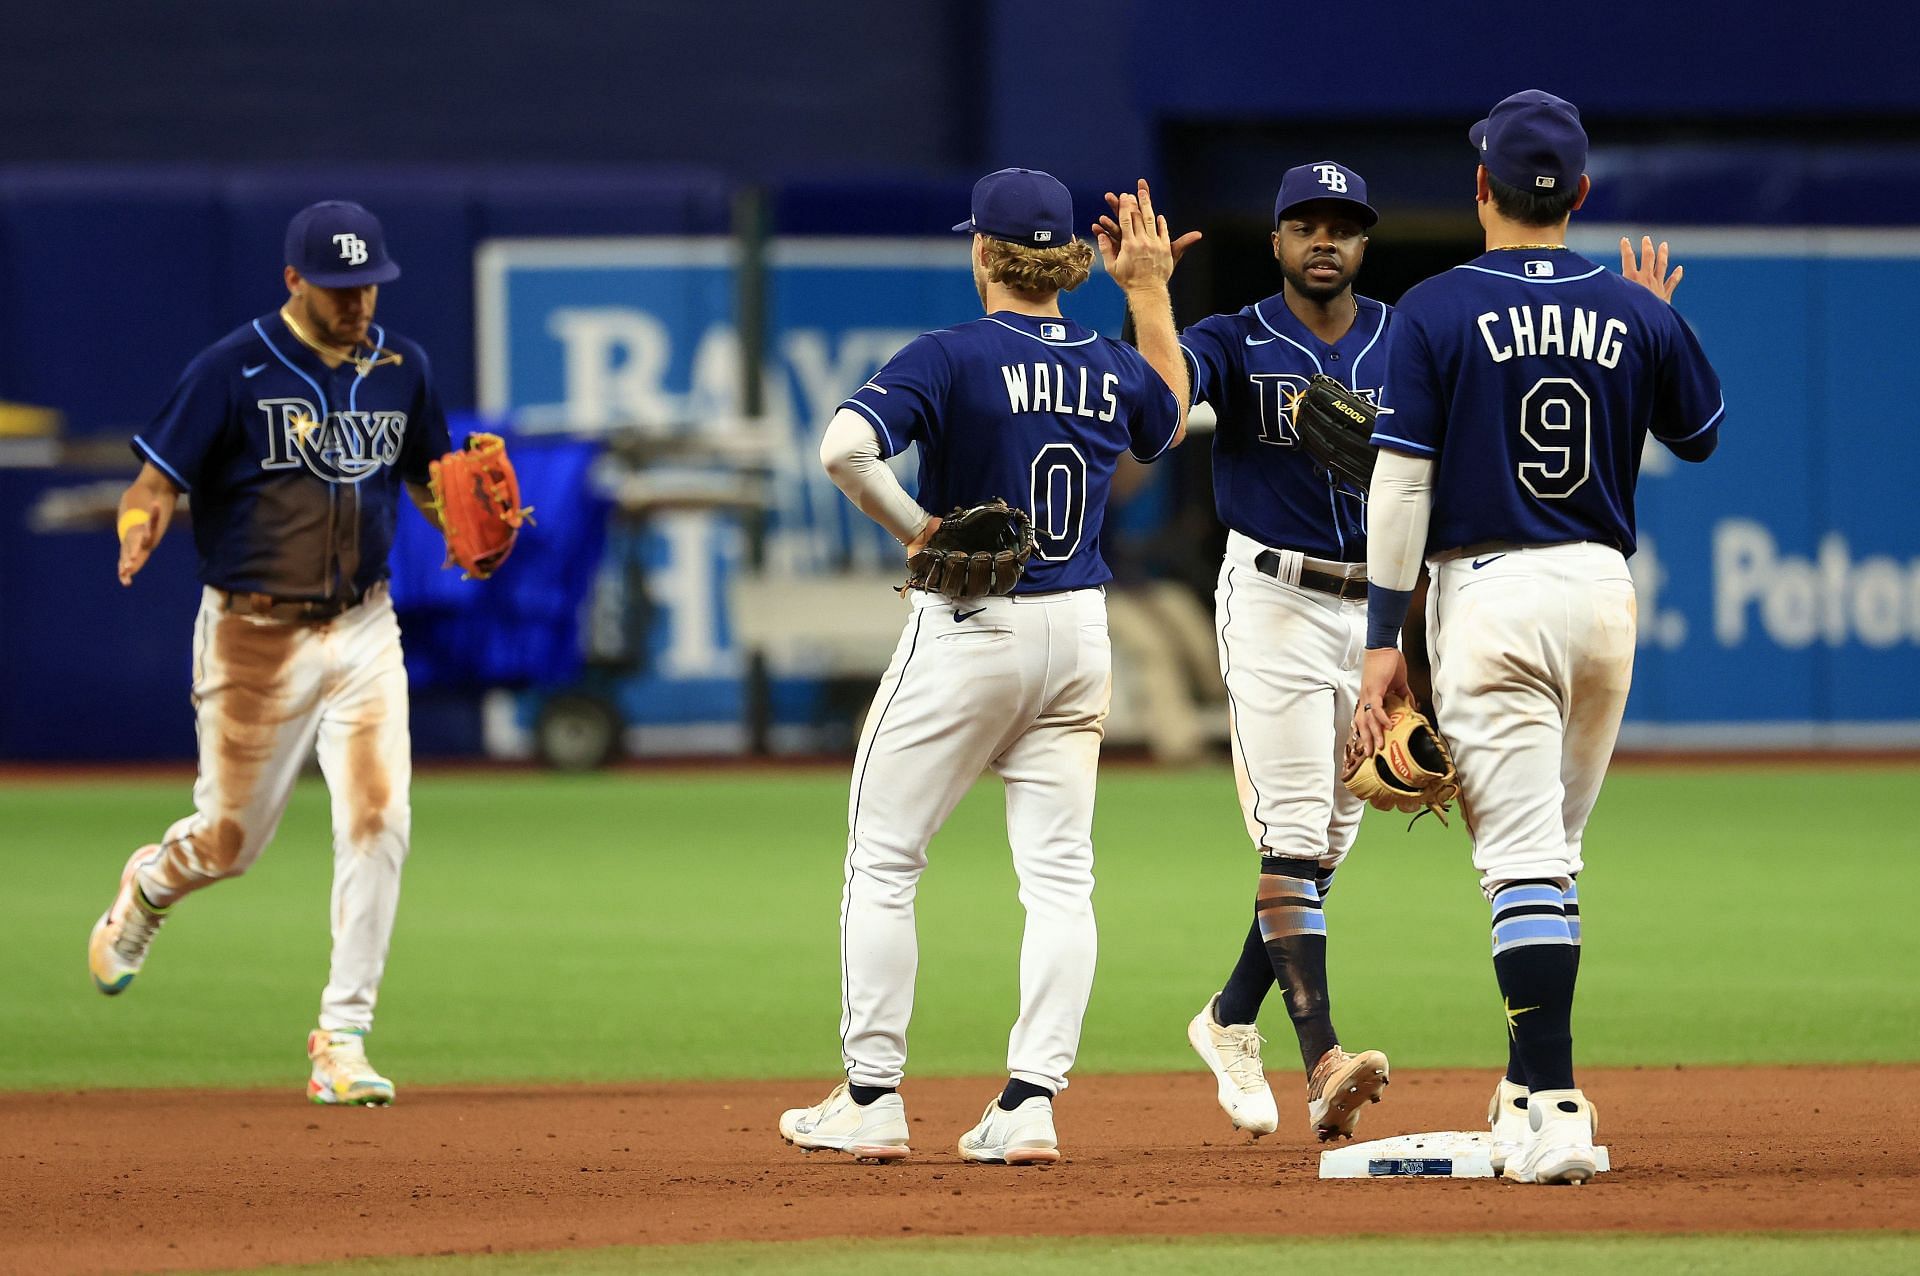 Rays celebrate after a game versus the Toronto Blue Jays.